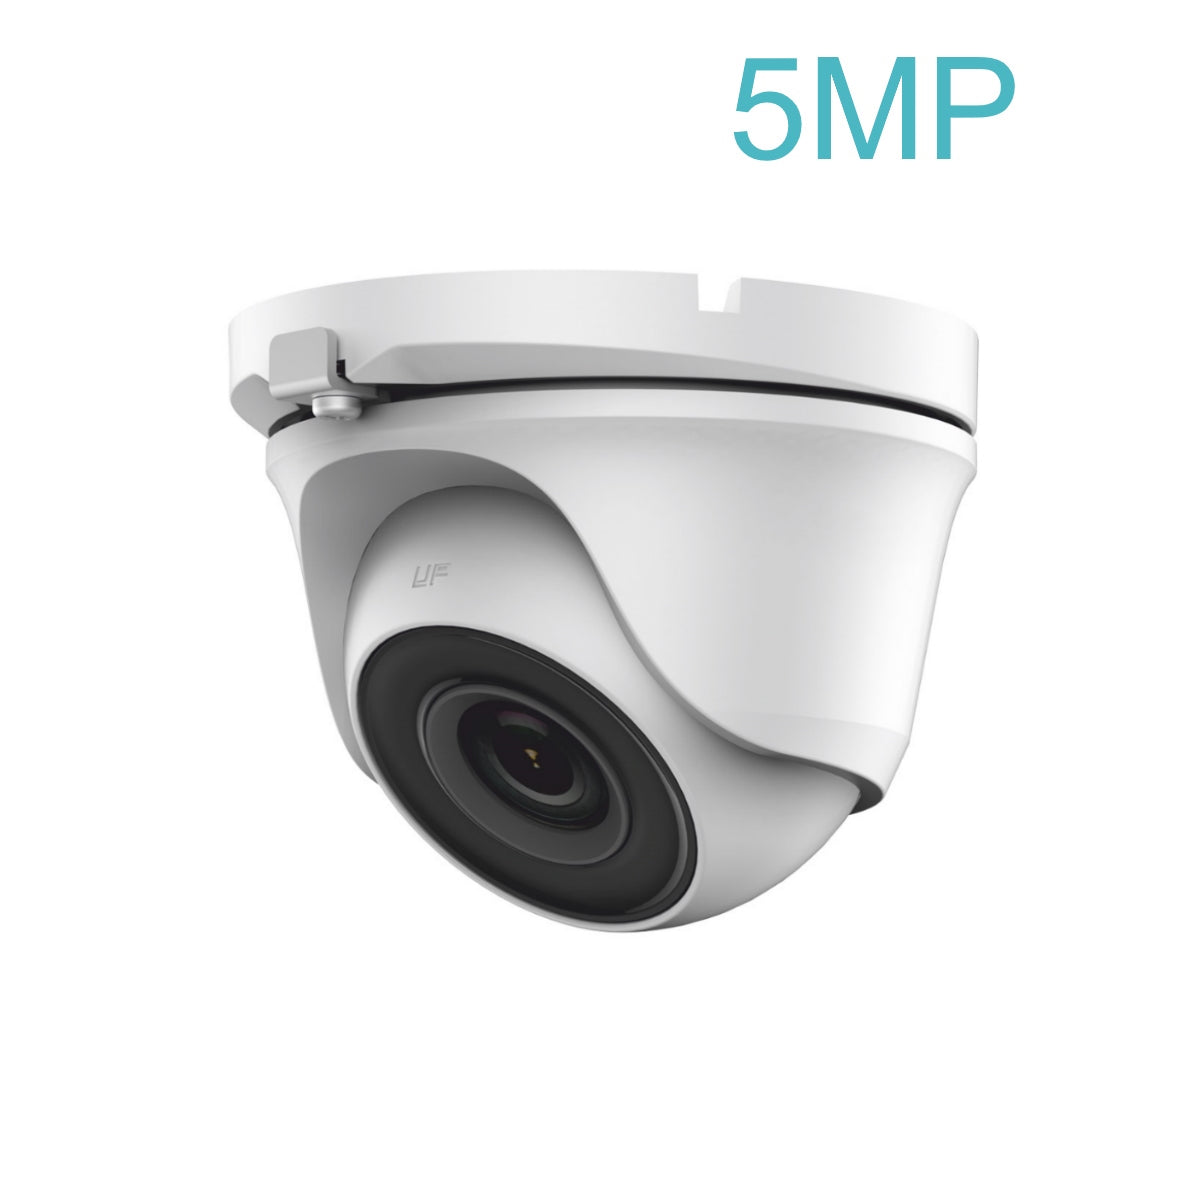 THC-T150-MS 2.8mm HiLook 5MP HD-TVI analogue turret camera with Built-in Mic and 20m IR